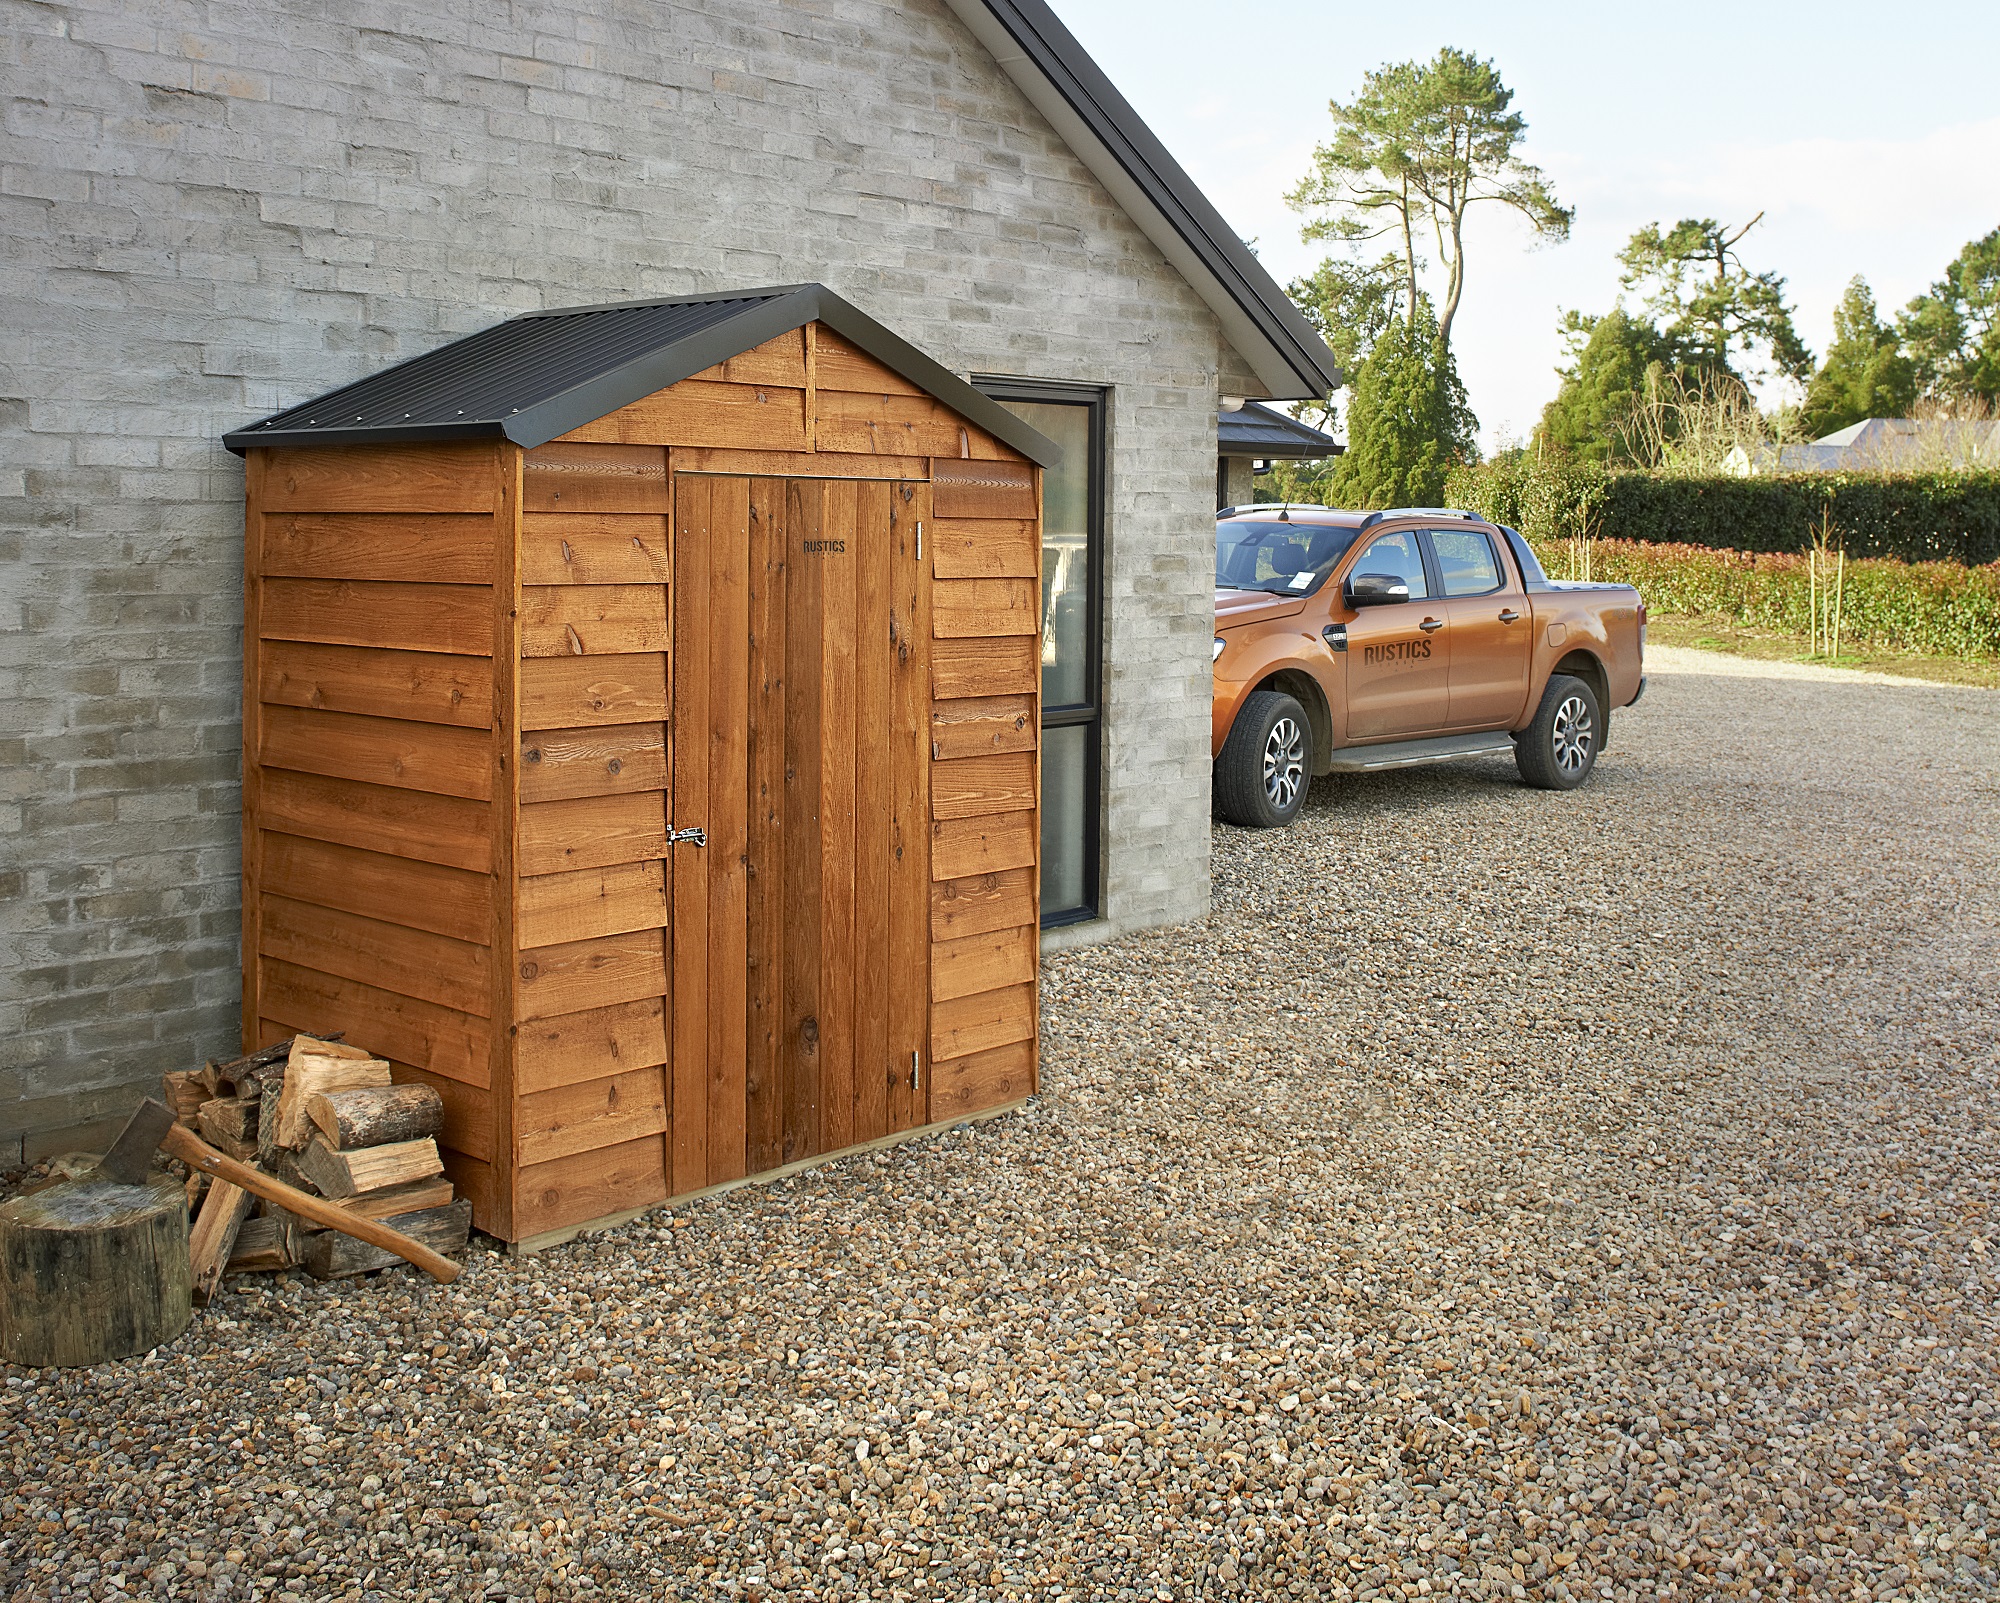 Sheds and Shelters - Garden Sheds and Carports NZ wide